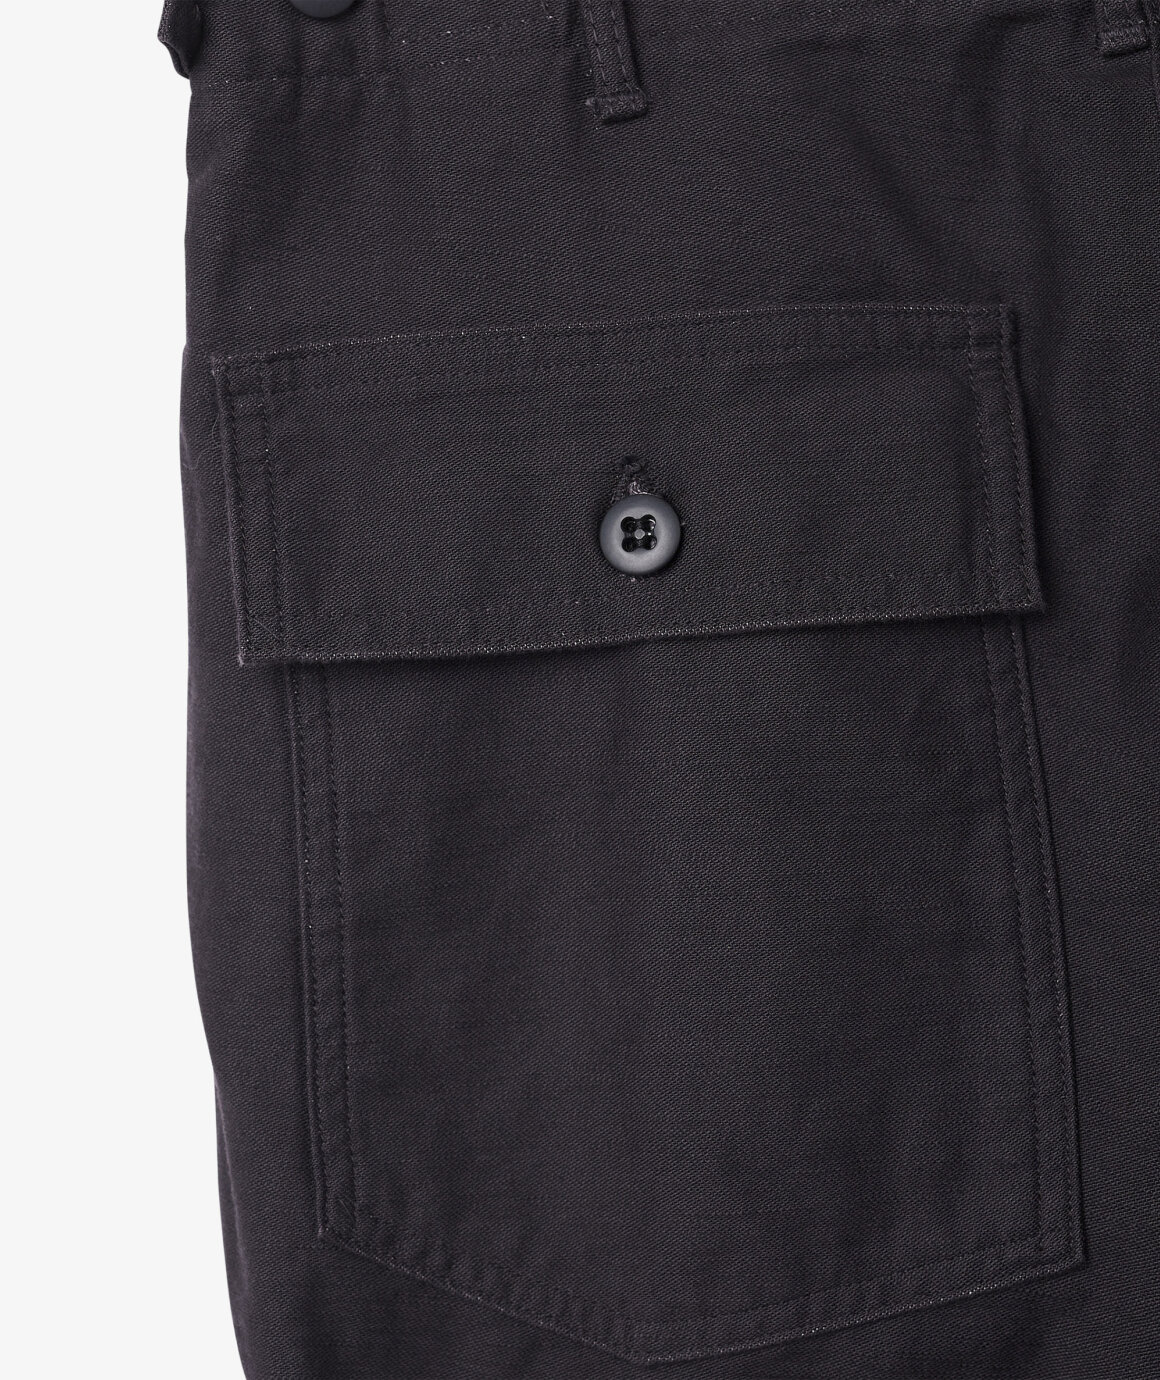 Norse Store | Shipping Worldwide - orSlow SLIM FIT FATIGUE PANTS - Black